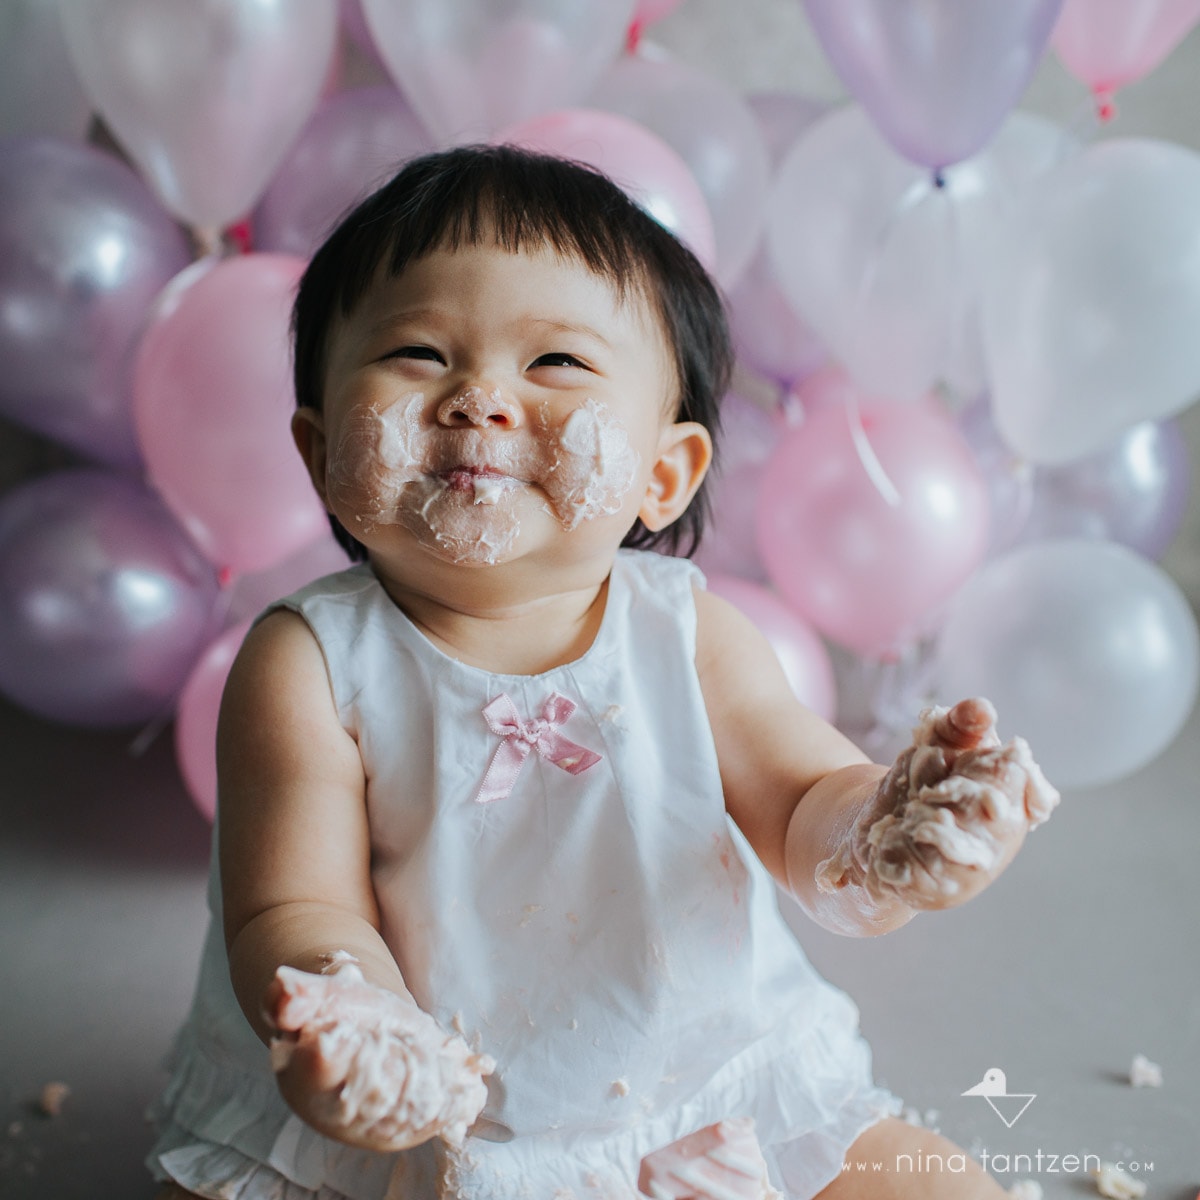 happy baby girl with cake